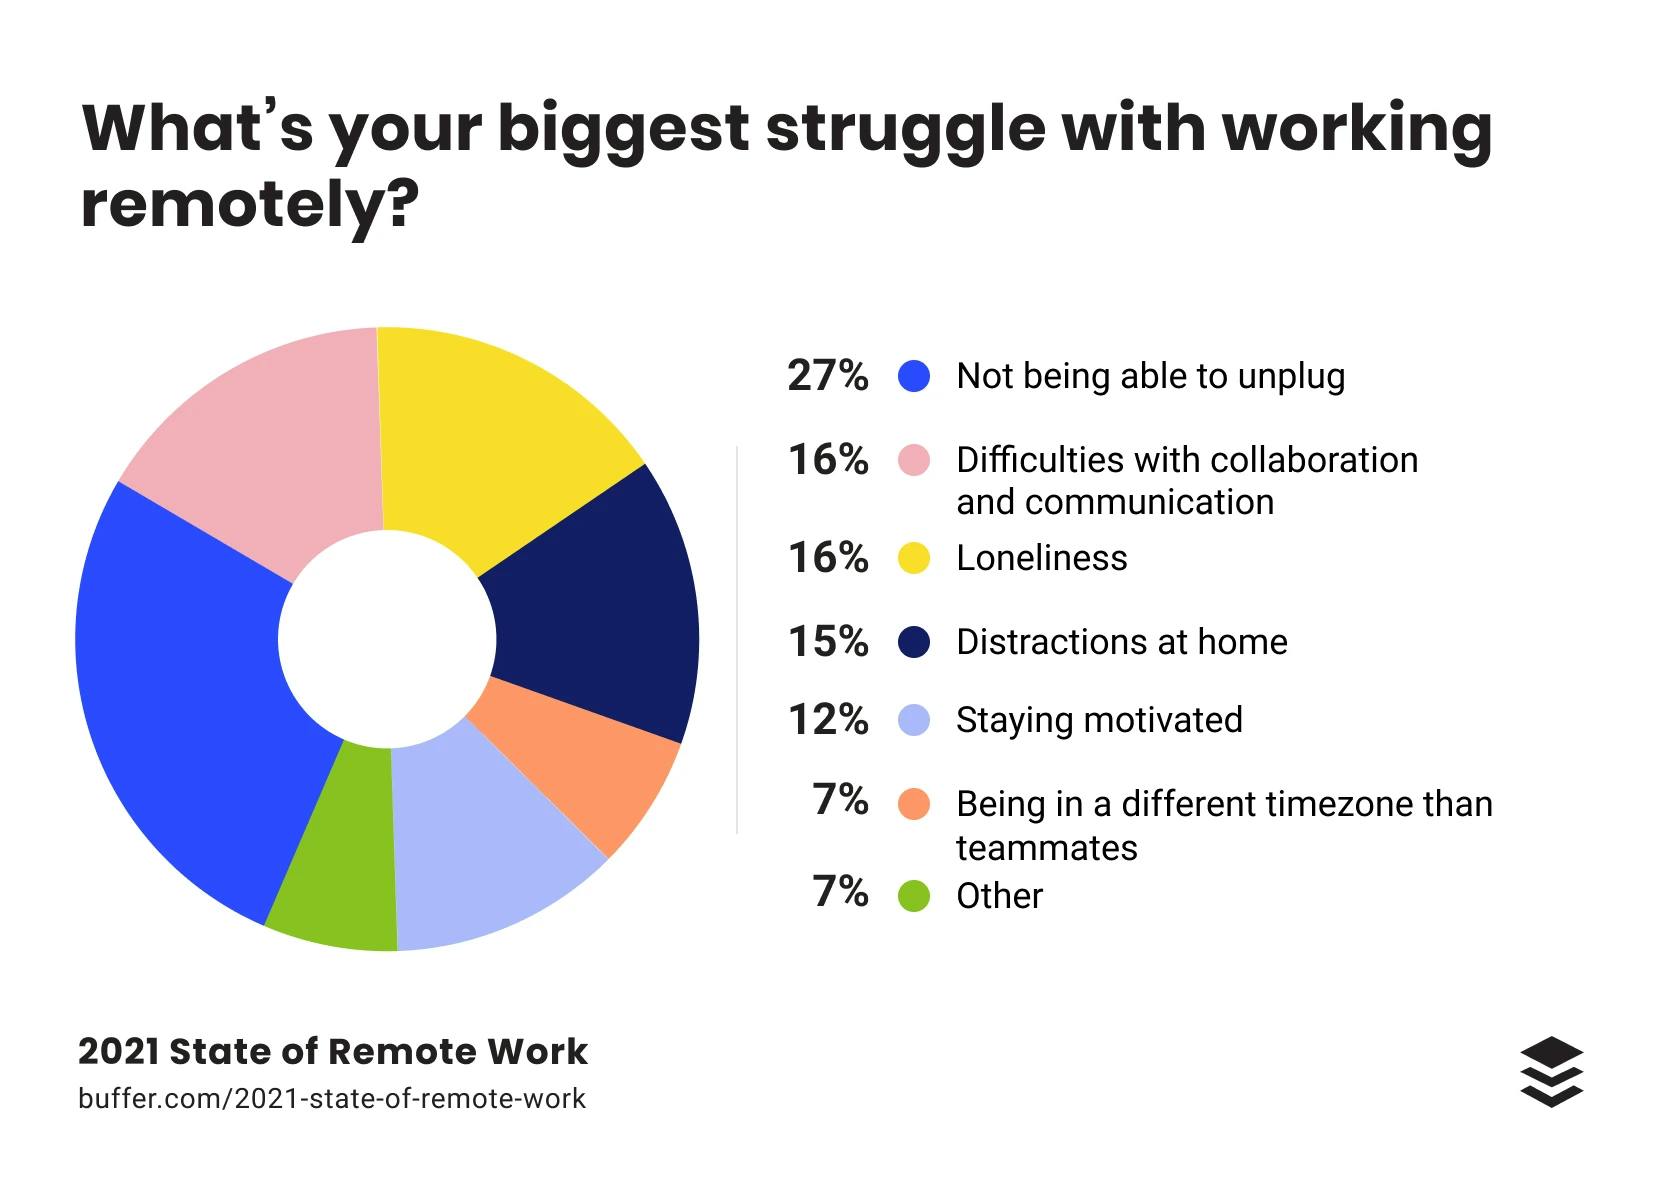 Buffer report shows that remote workers struggle with communication 